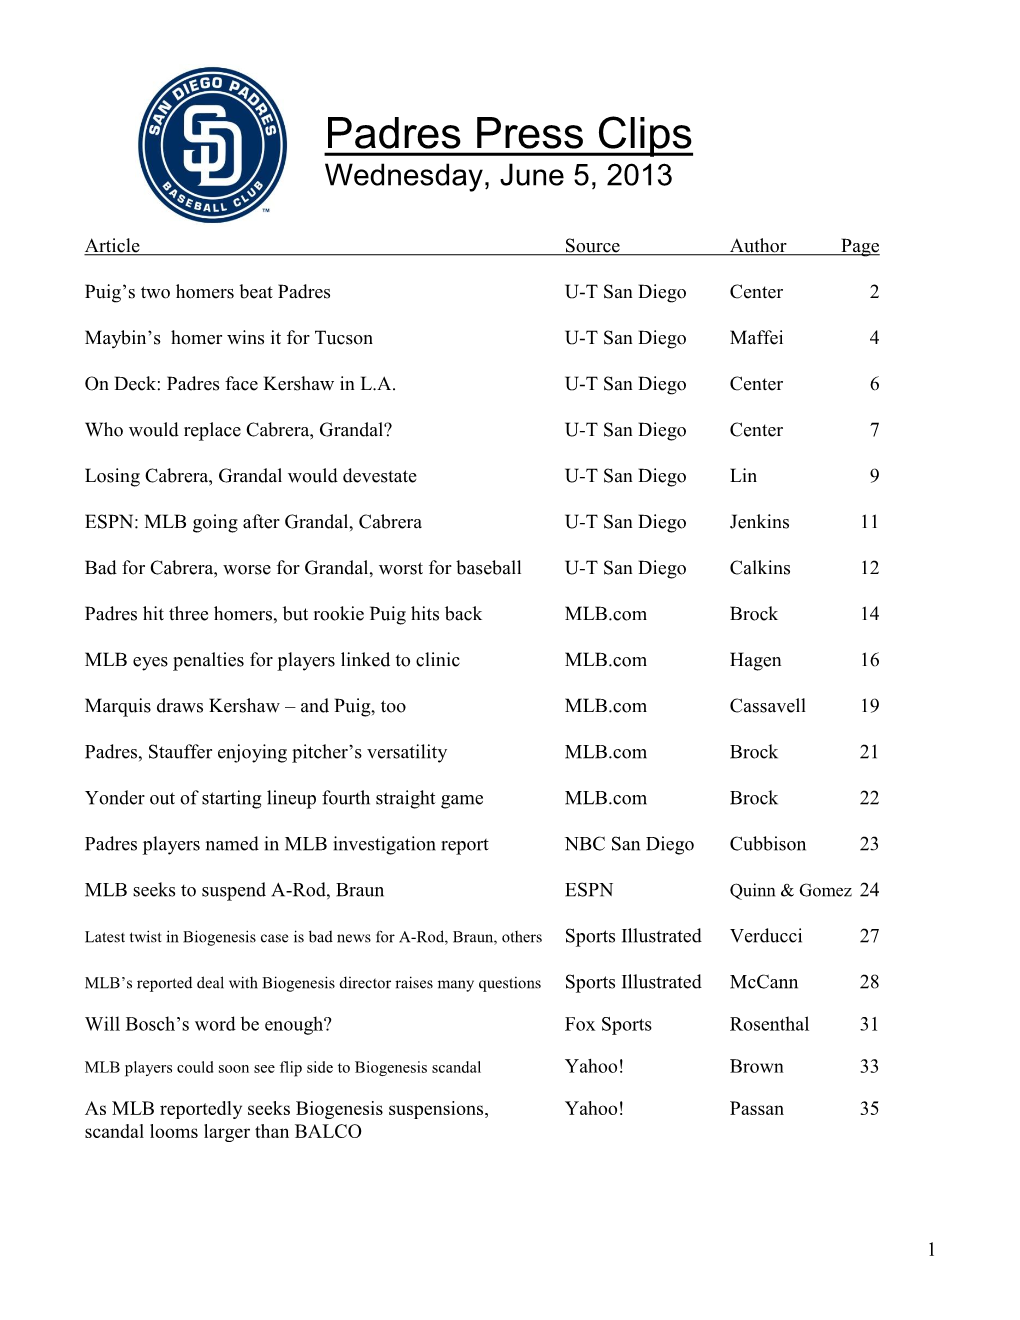 Padres Press Clips Wednesday, June 5, 2013